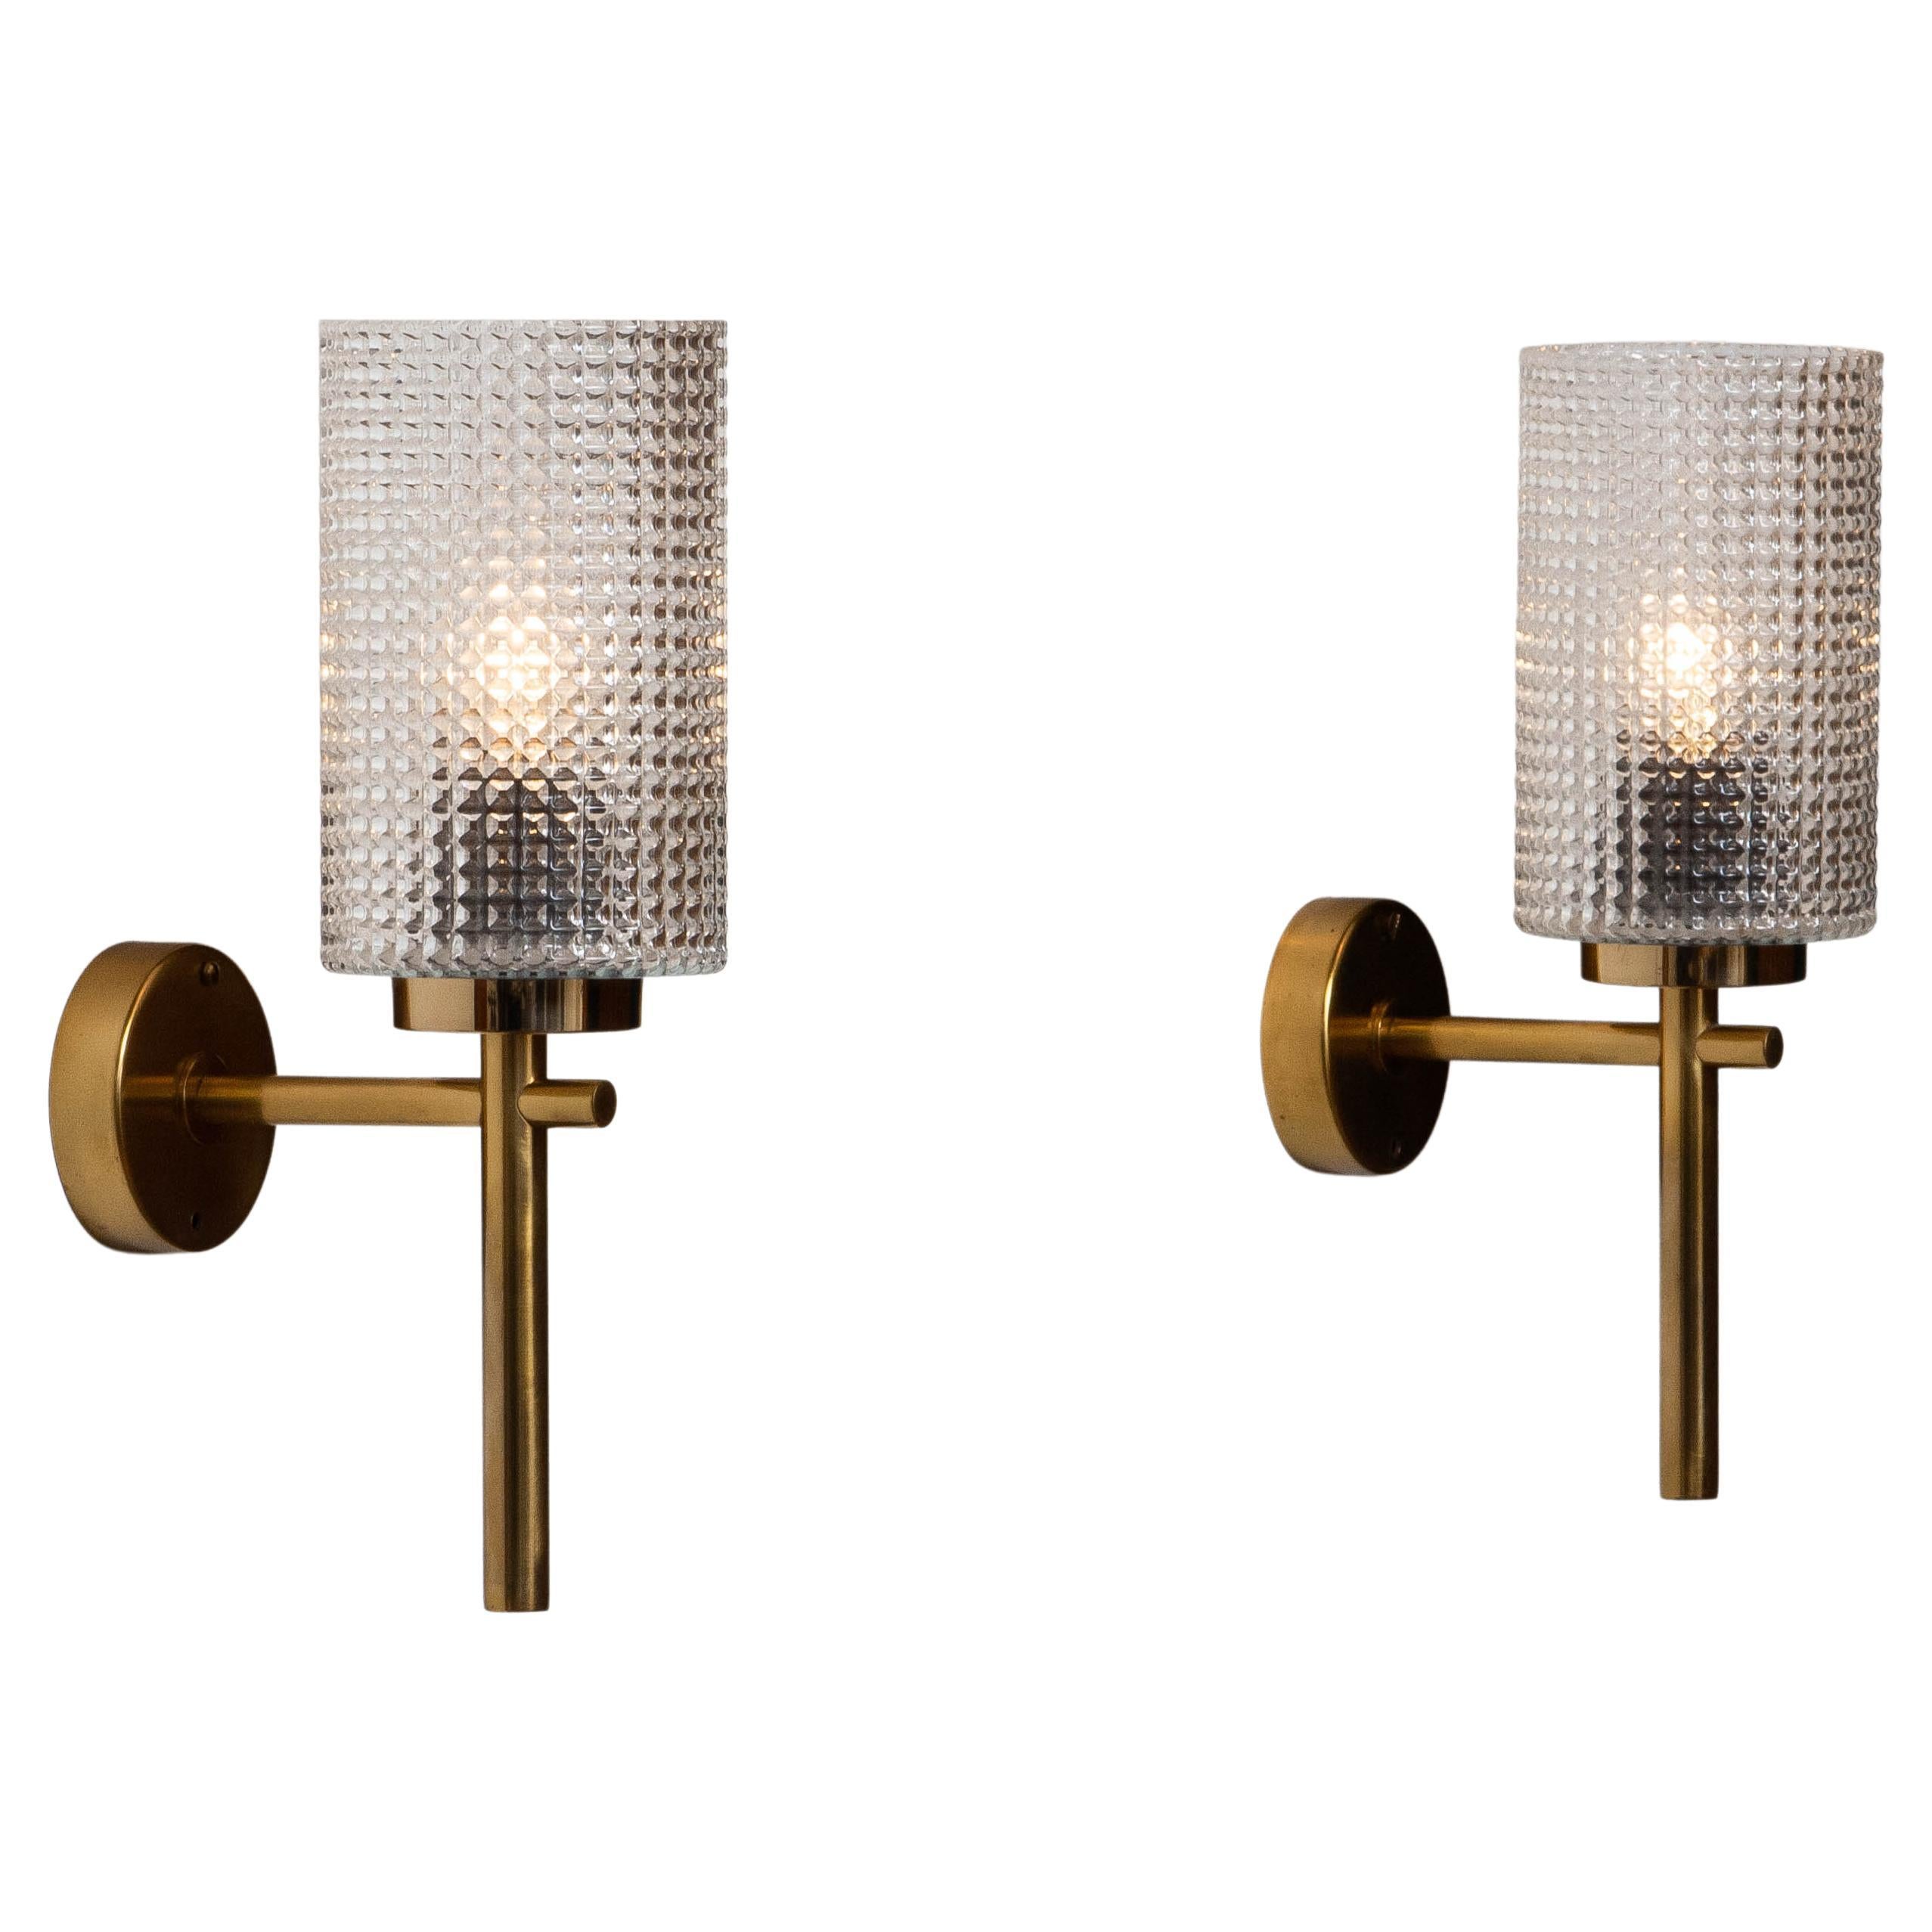 1960s Pair Swedish Brass Wall Lights / Sconces by Carl Fagerlund for Orrefors